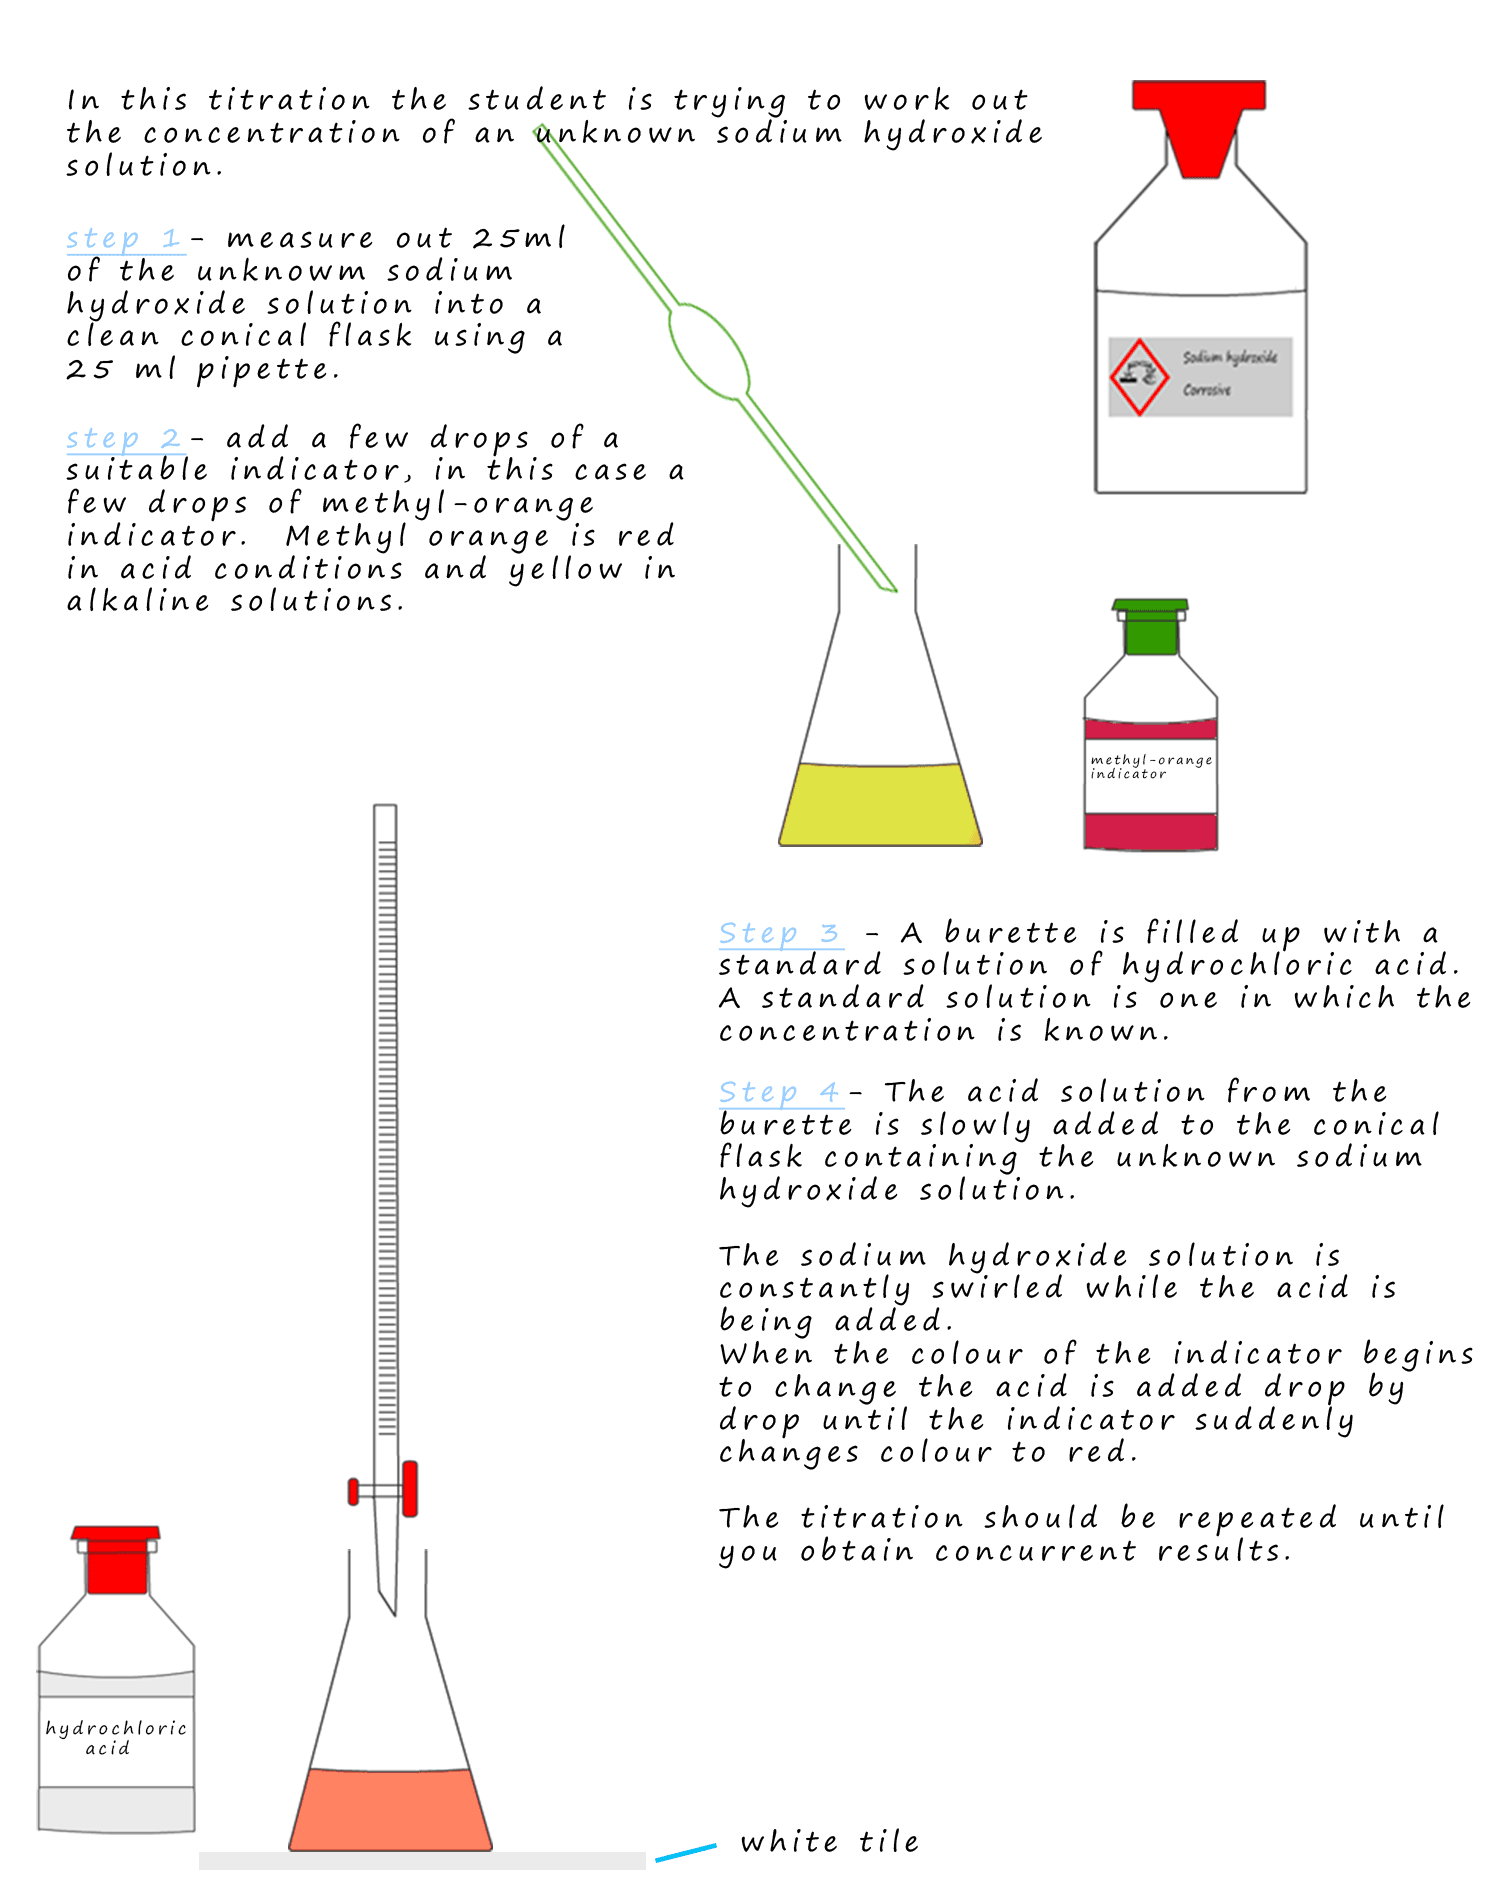 Detailed method for carrying out a titration using a standard acid solution and methyl orange indicator.